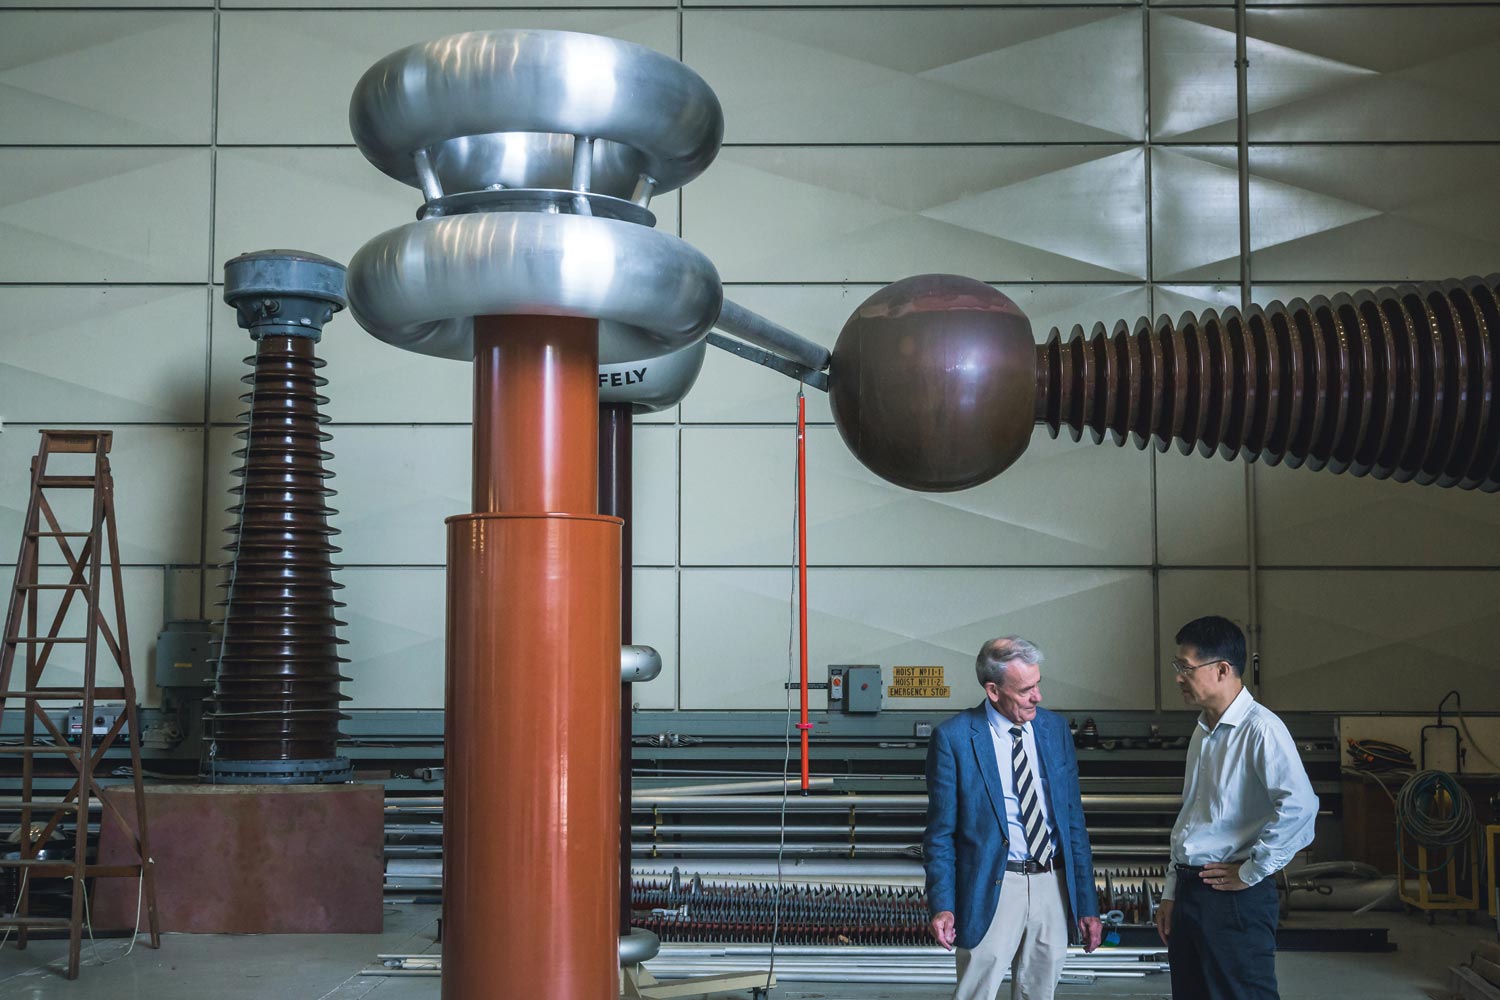 Inglis (left) and a colleague in front of a high voltage divider.